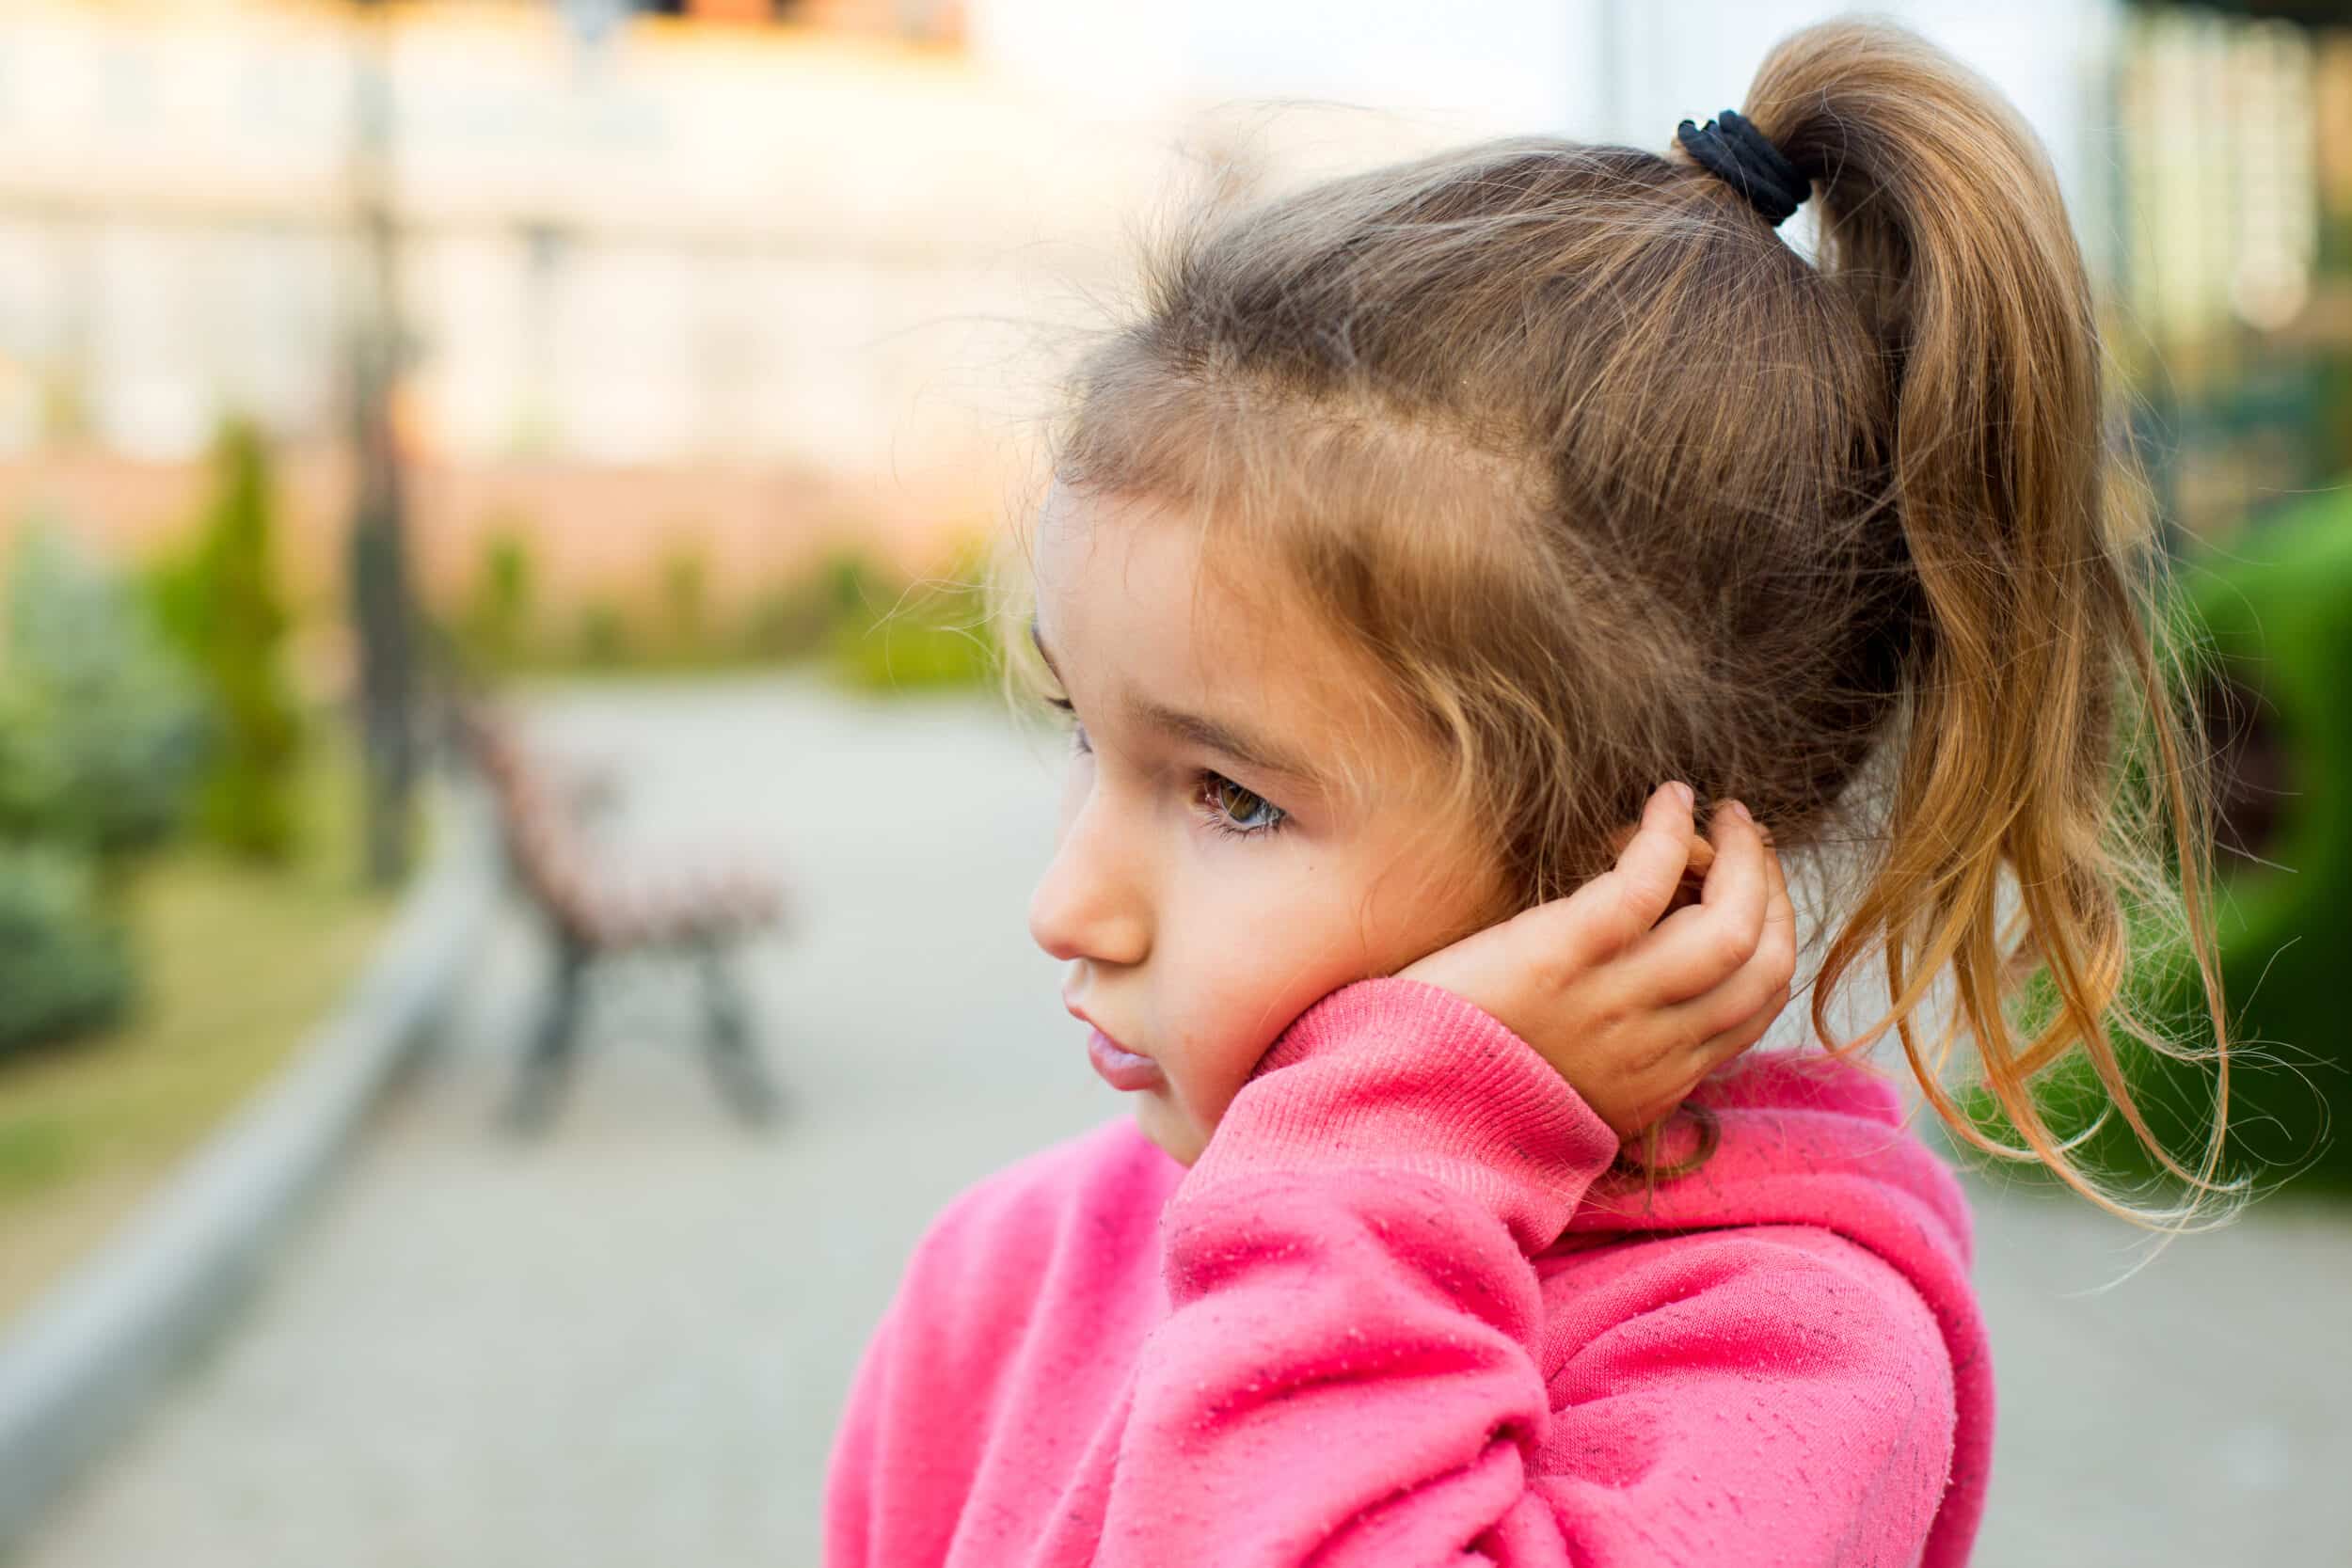 A child holding her ear because of an ear infection